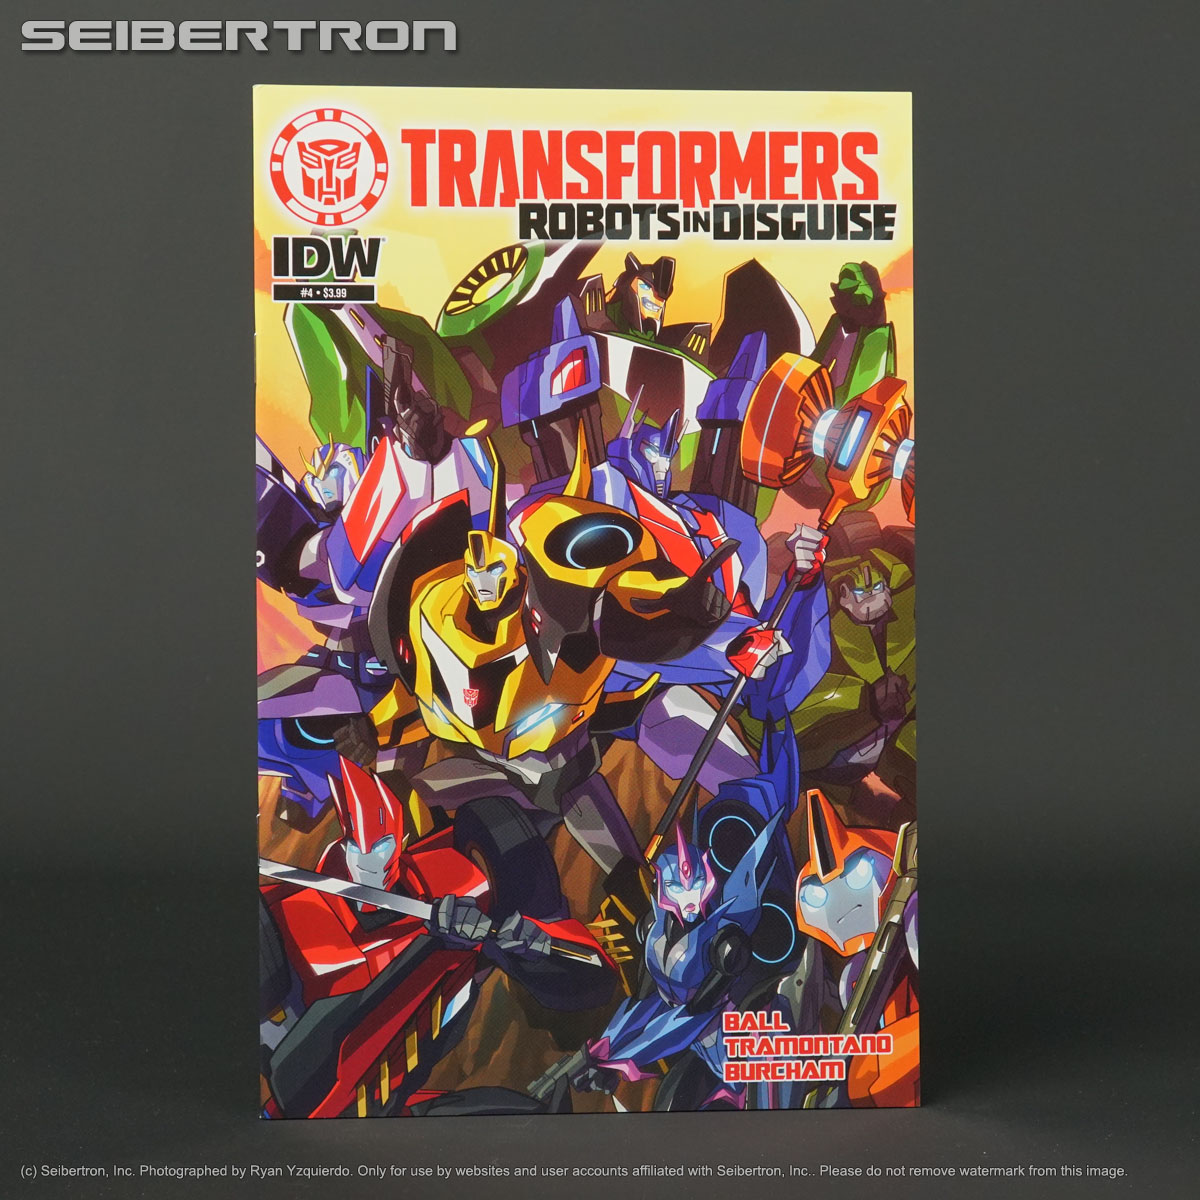 Transformers ROBOTS IN DISGUISE #4 IDW Comics 2015 201208A (CA) Tramontano